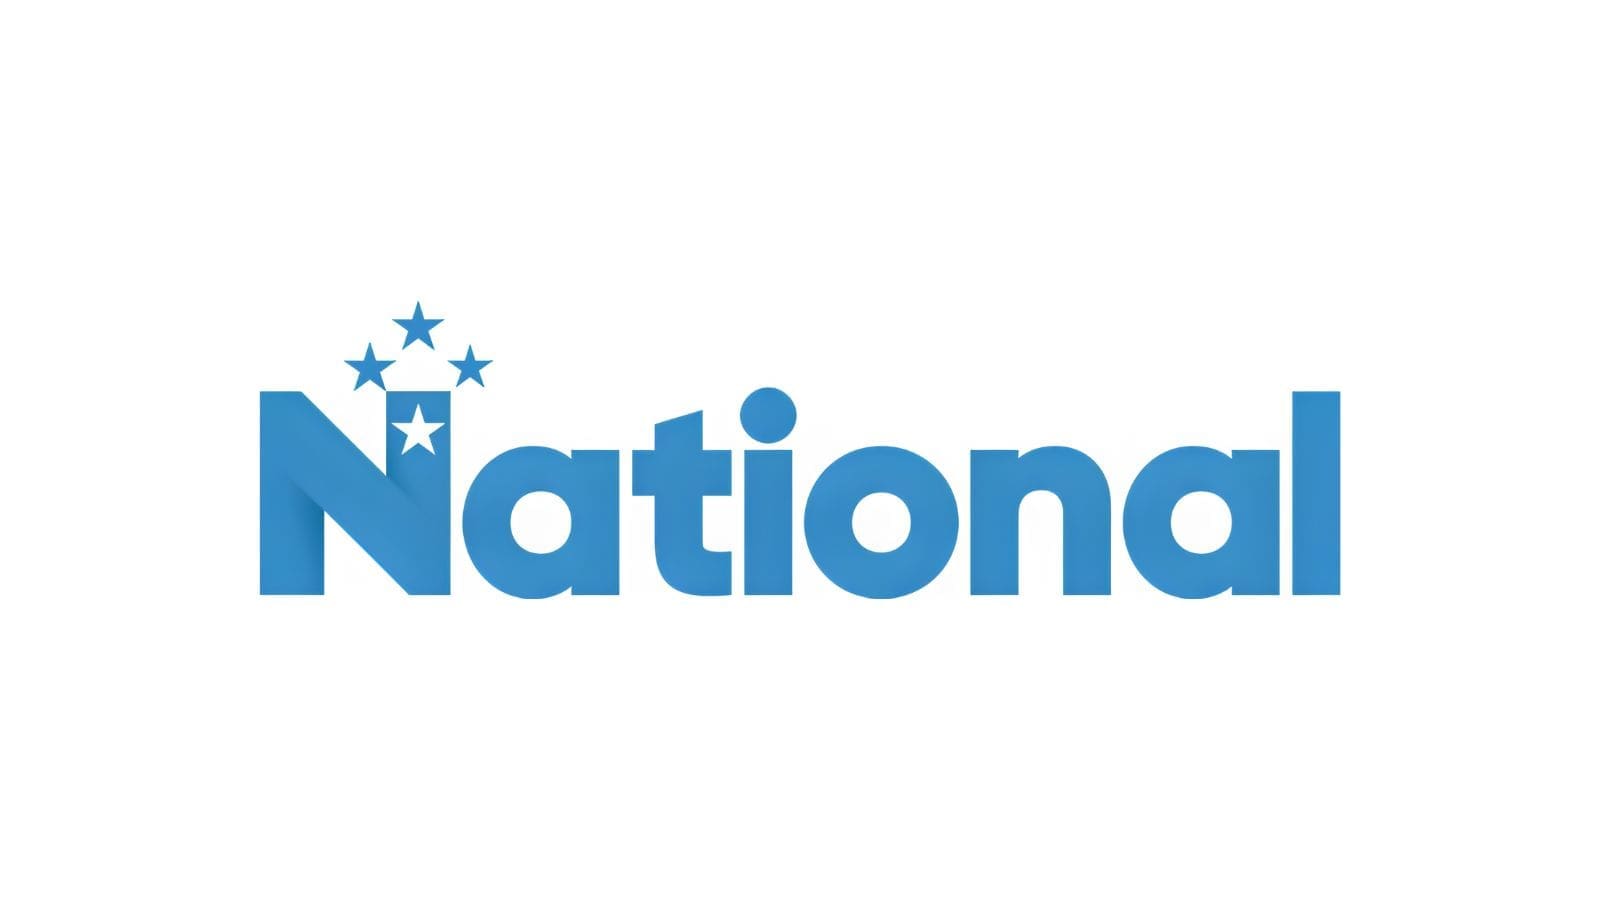 The word "National" in blue with four stars above the blue star.